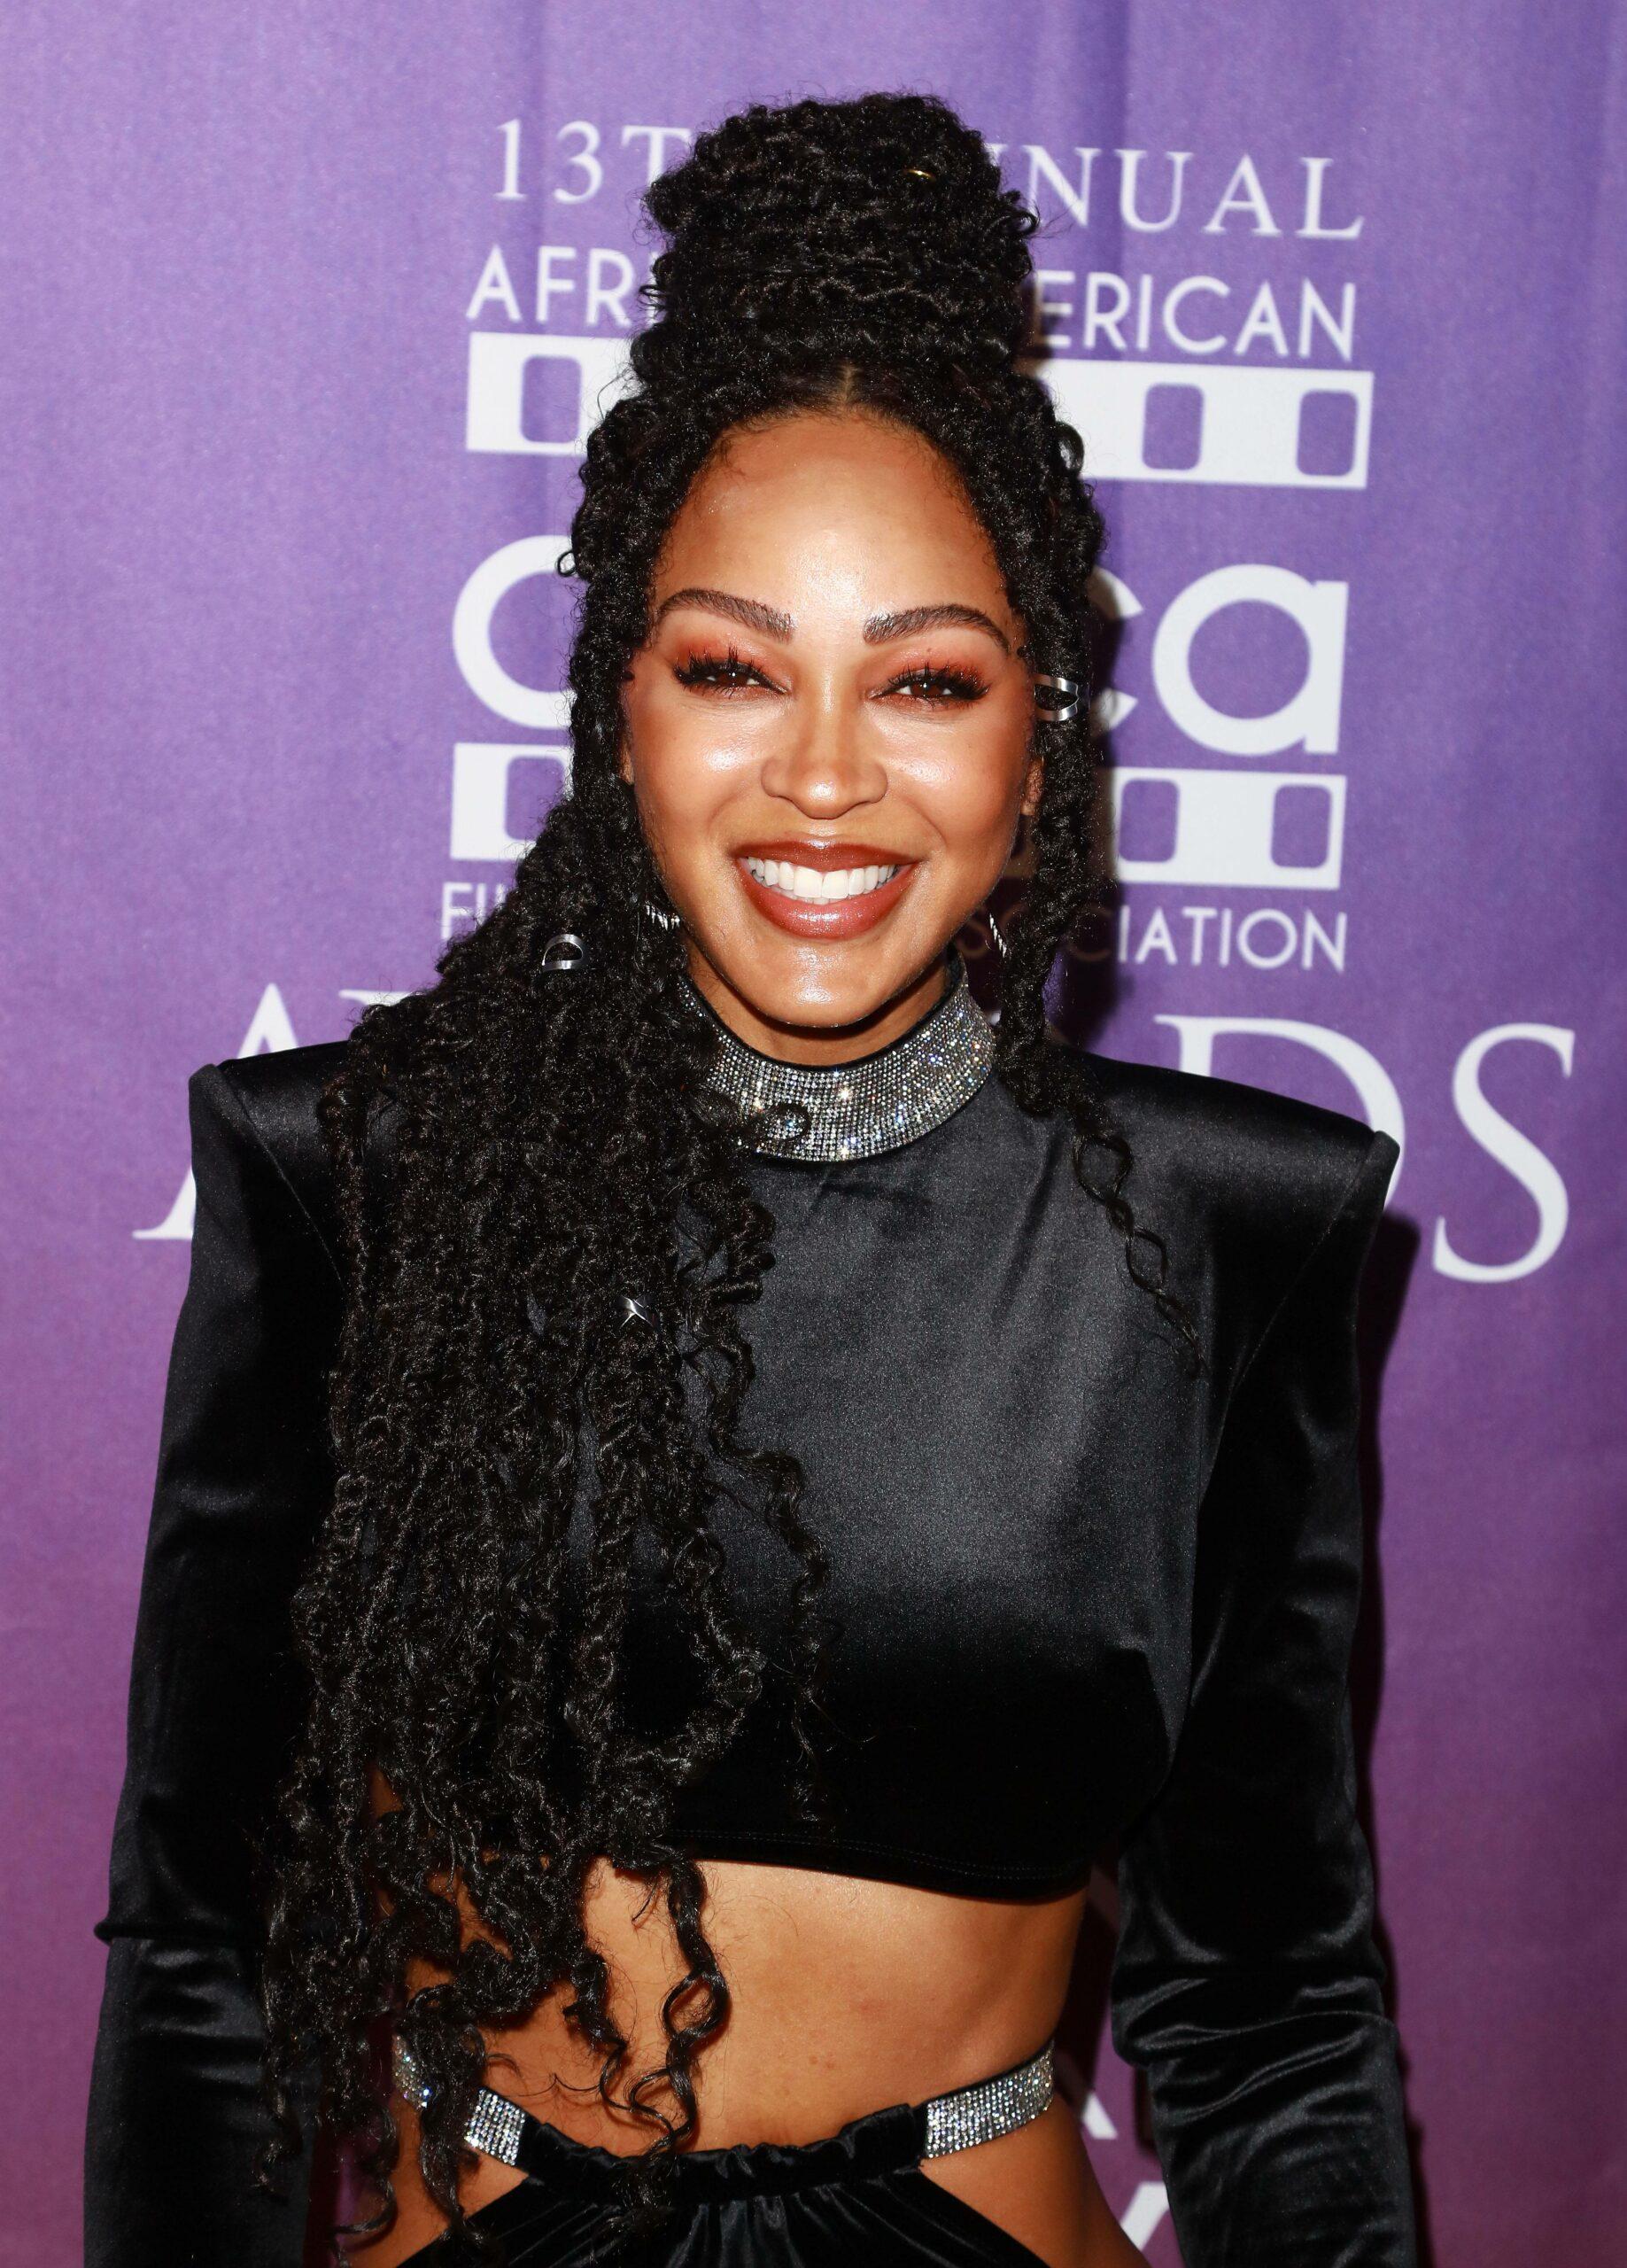 Meagan Good attends the 13th Annual AAFCA Awards in Los Angeles